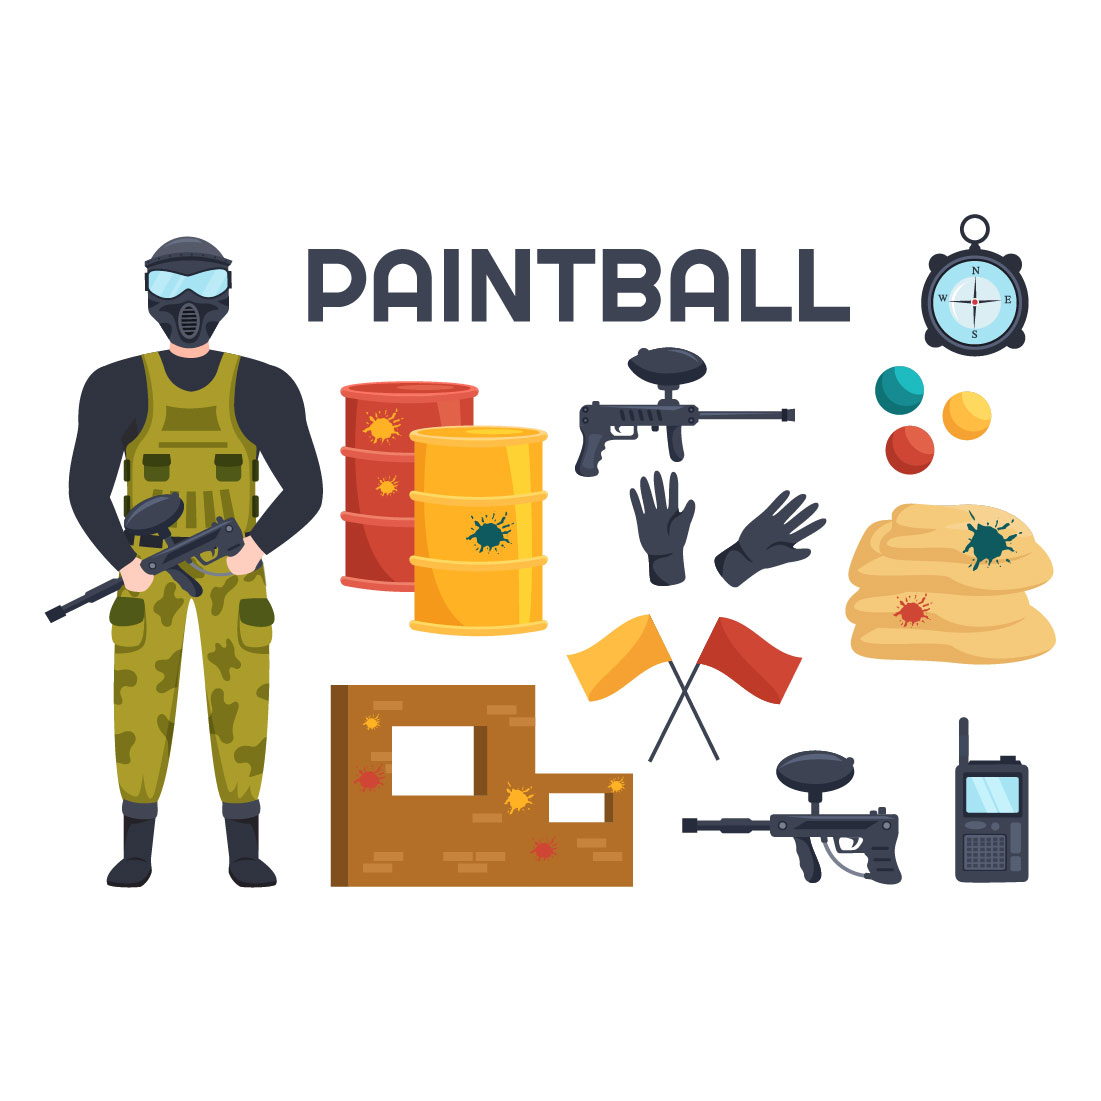 Game Paintball Design Illustration cover image.